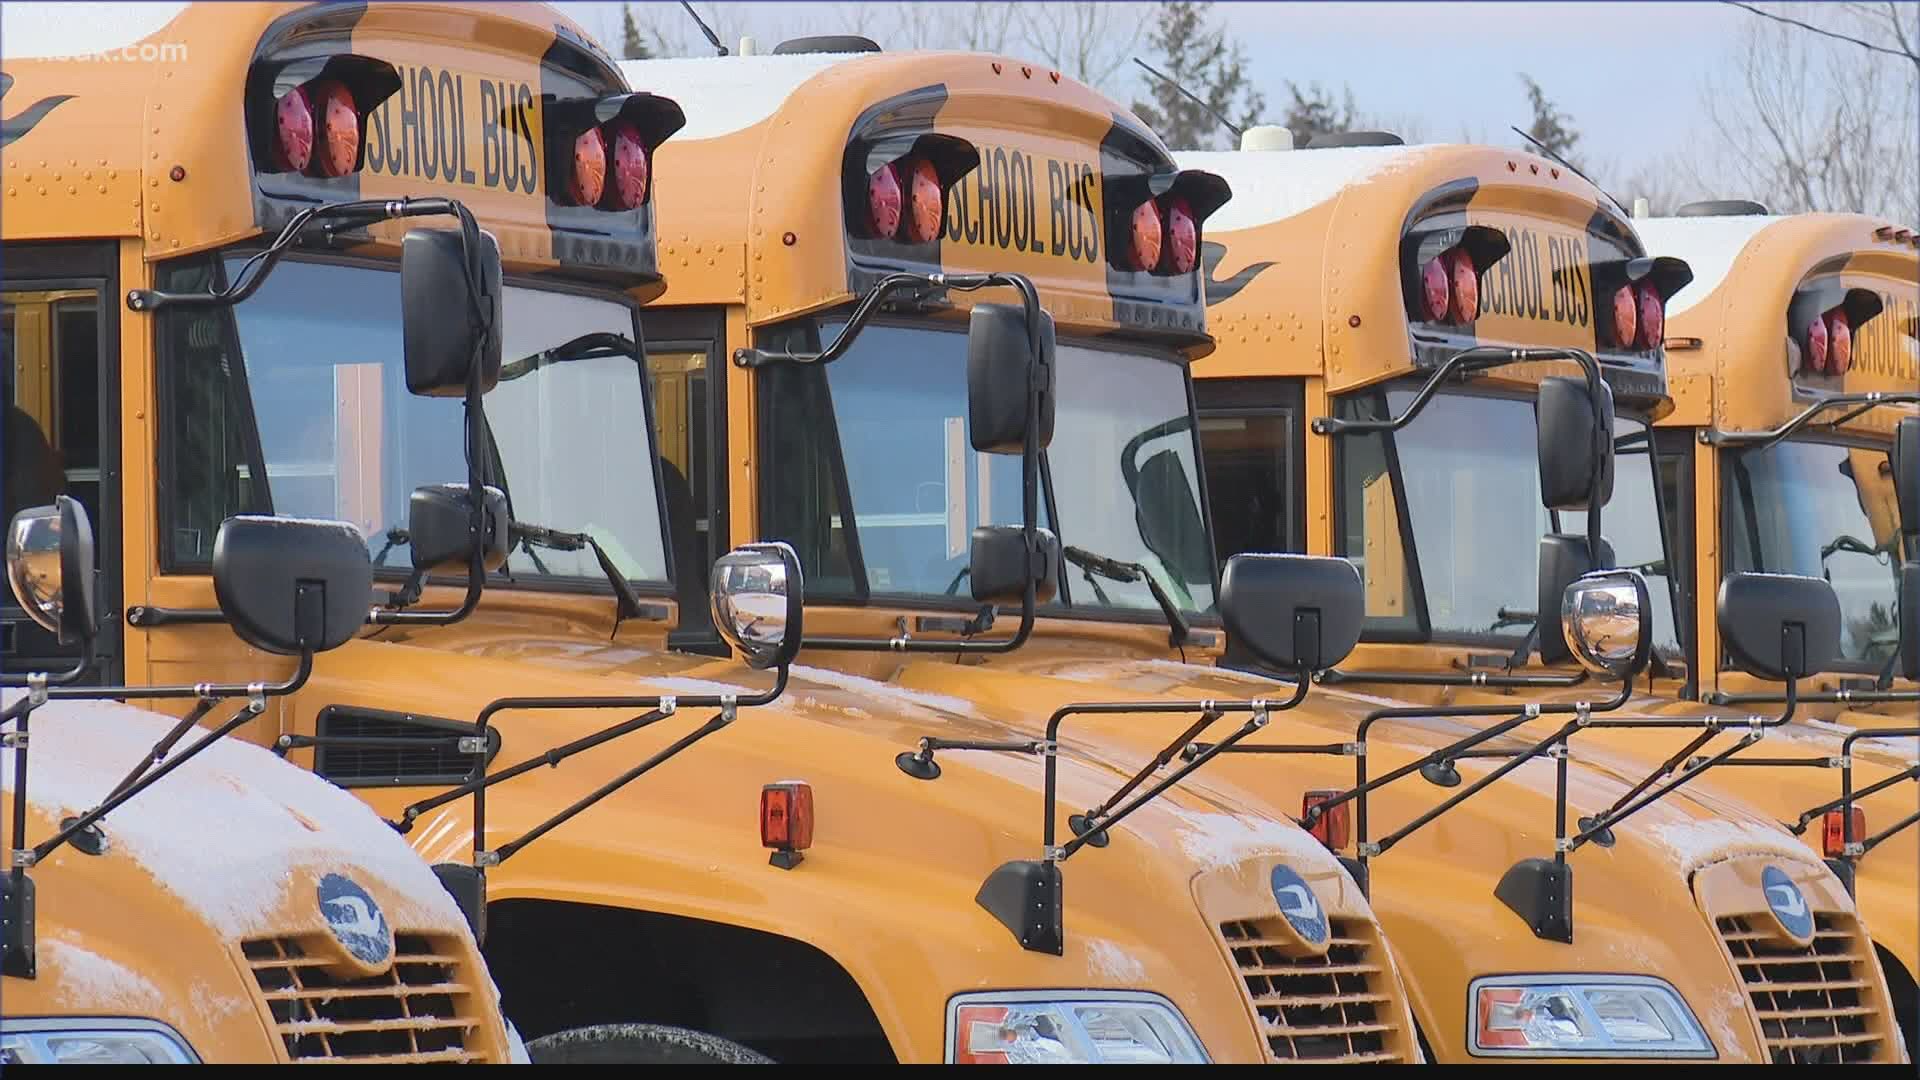 More students will have to walk to school due to a shortage of bus drivers.